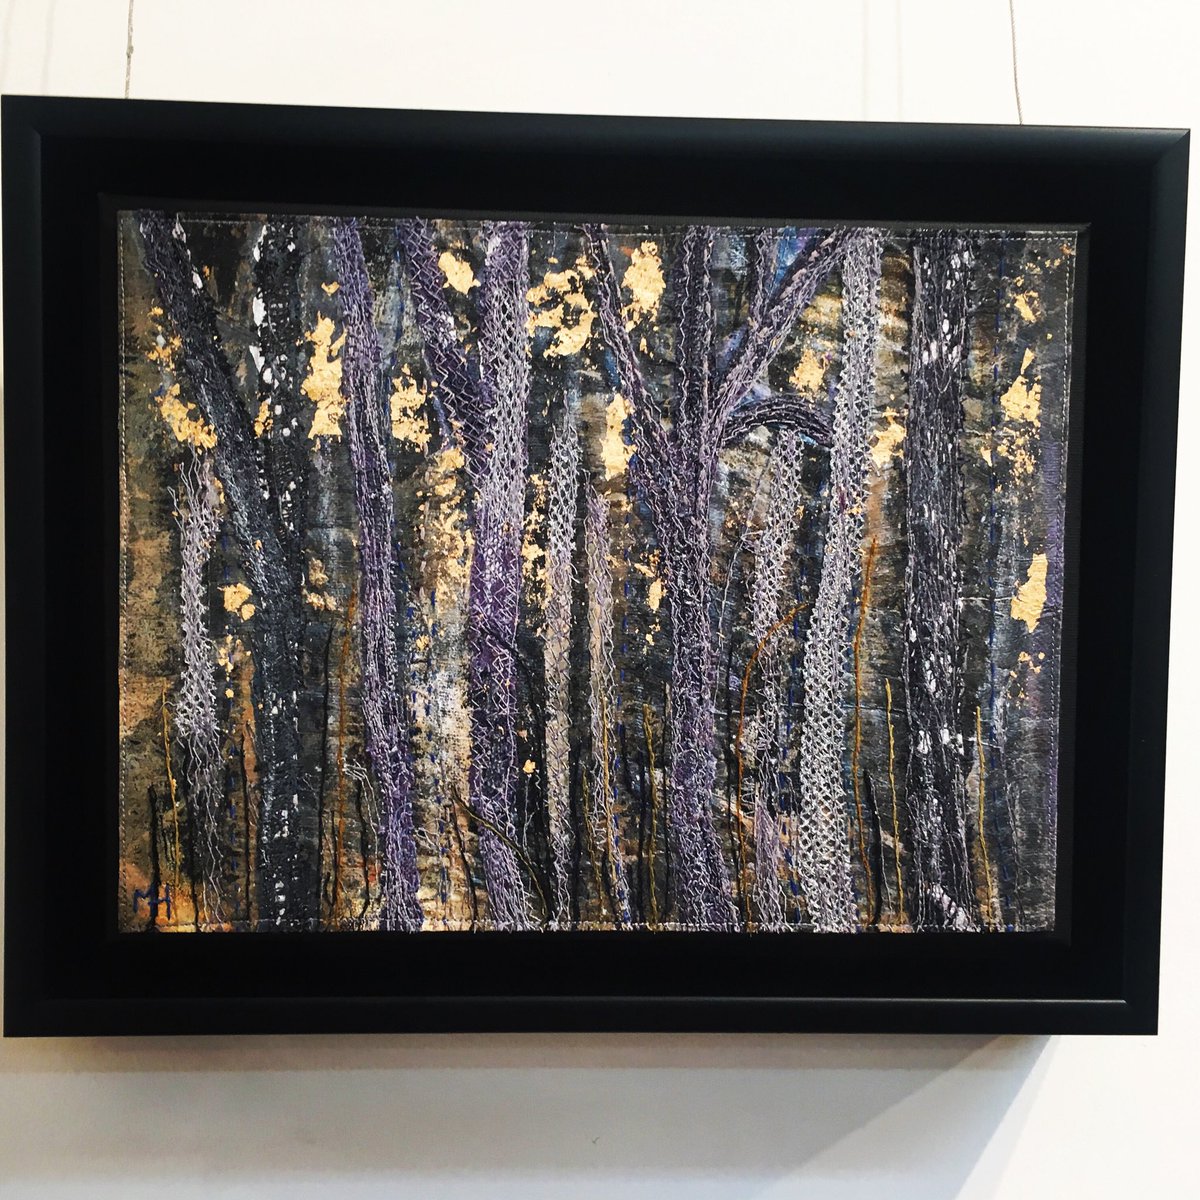 this work is hanging in our regional #salafestival #exhibition. seeking the #Otherness of #Light #wandering through my #australianbushland #mixedmedia #textileart #embroideryisart #freemotionembroidery #textilecollage #metalleaf #acrylic #oilstick #vintagelace #australianart